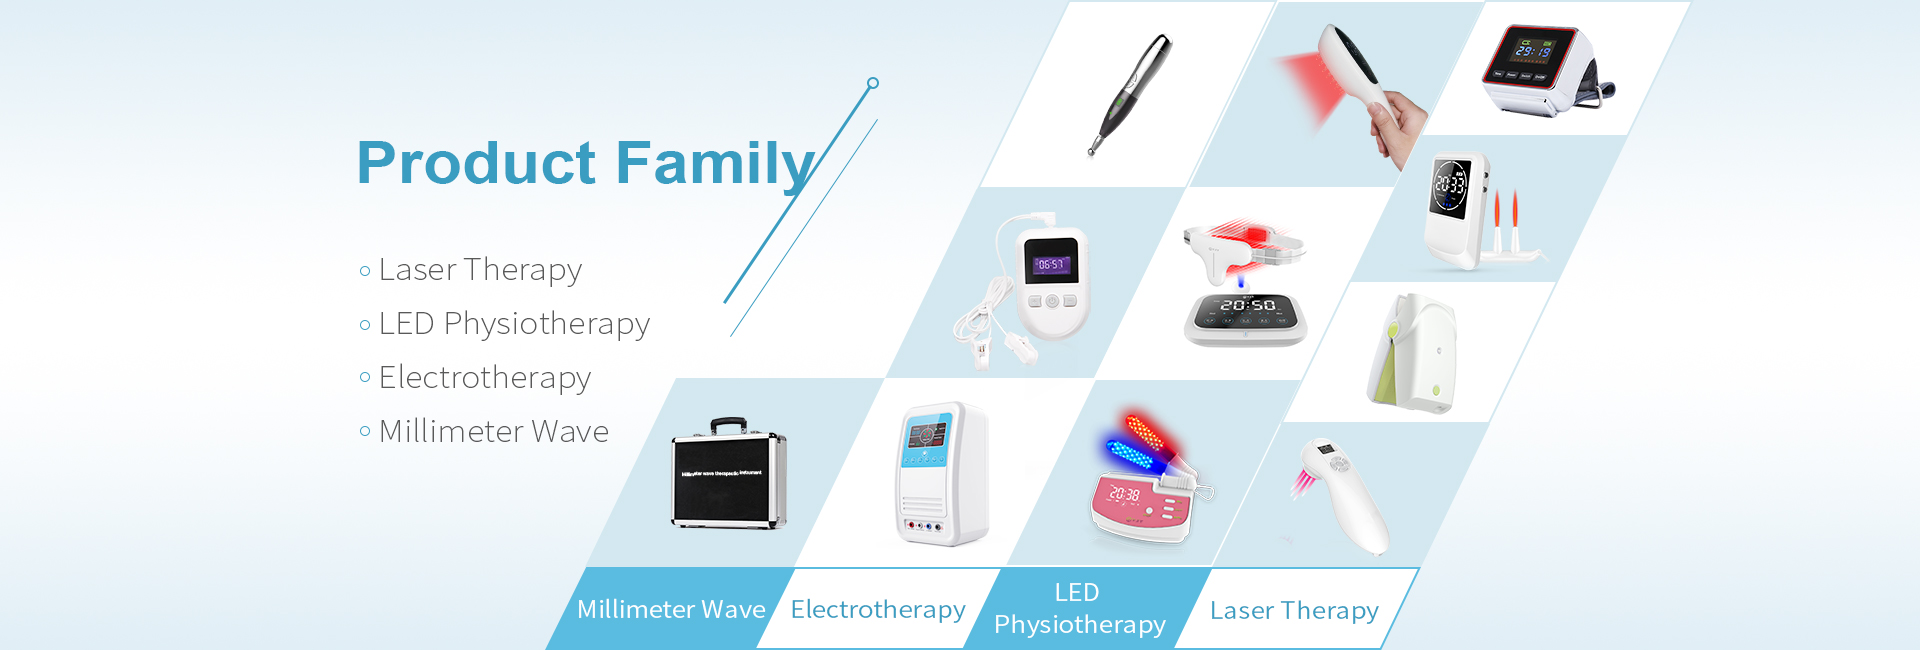 LED Therapielampe